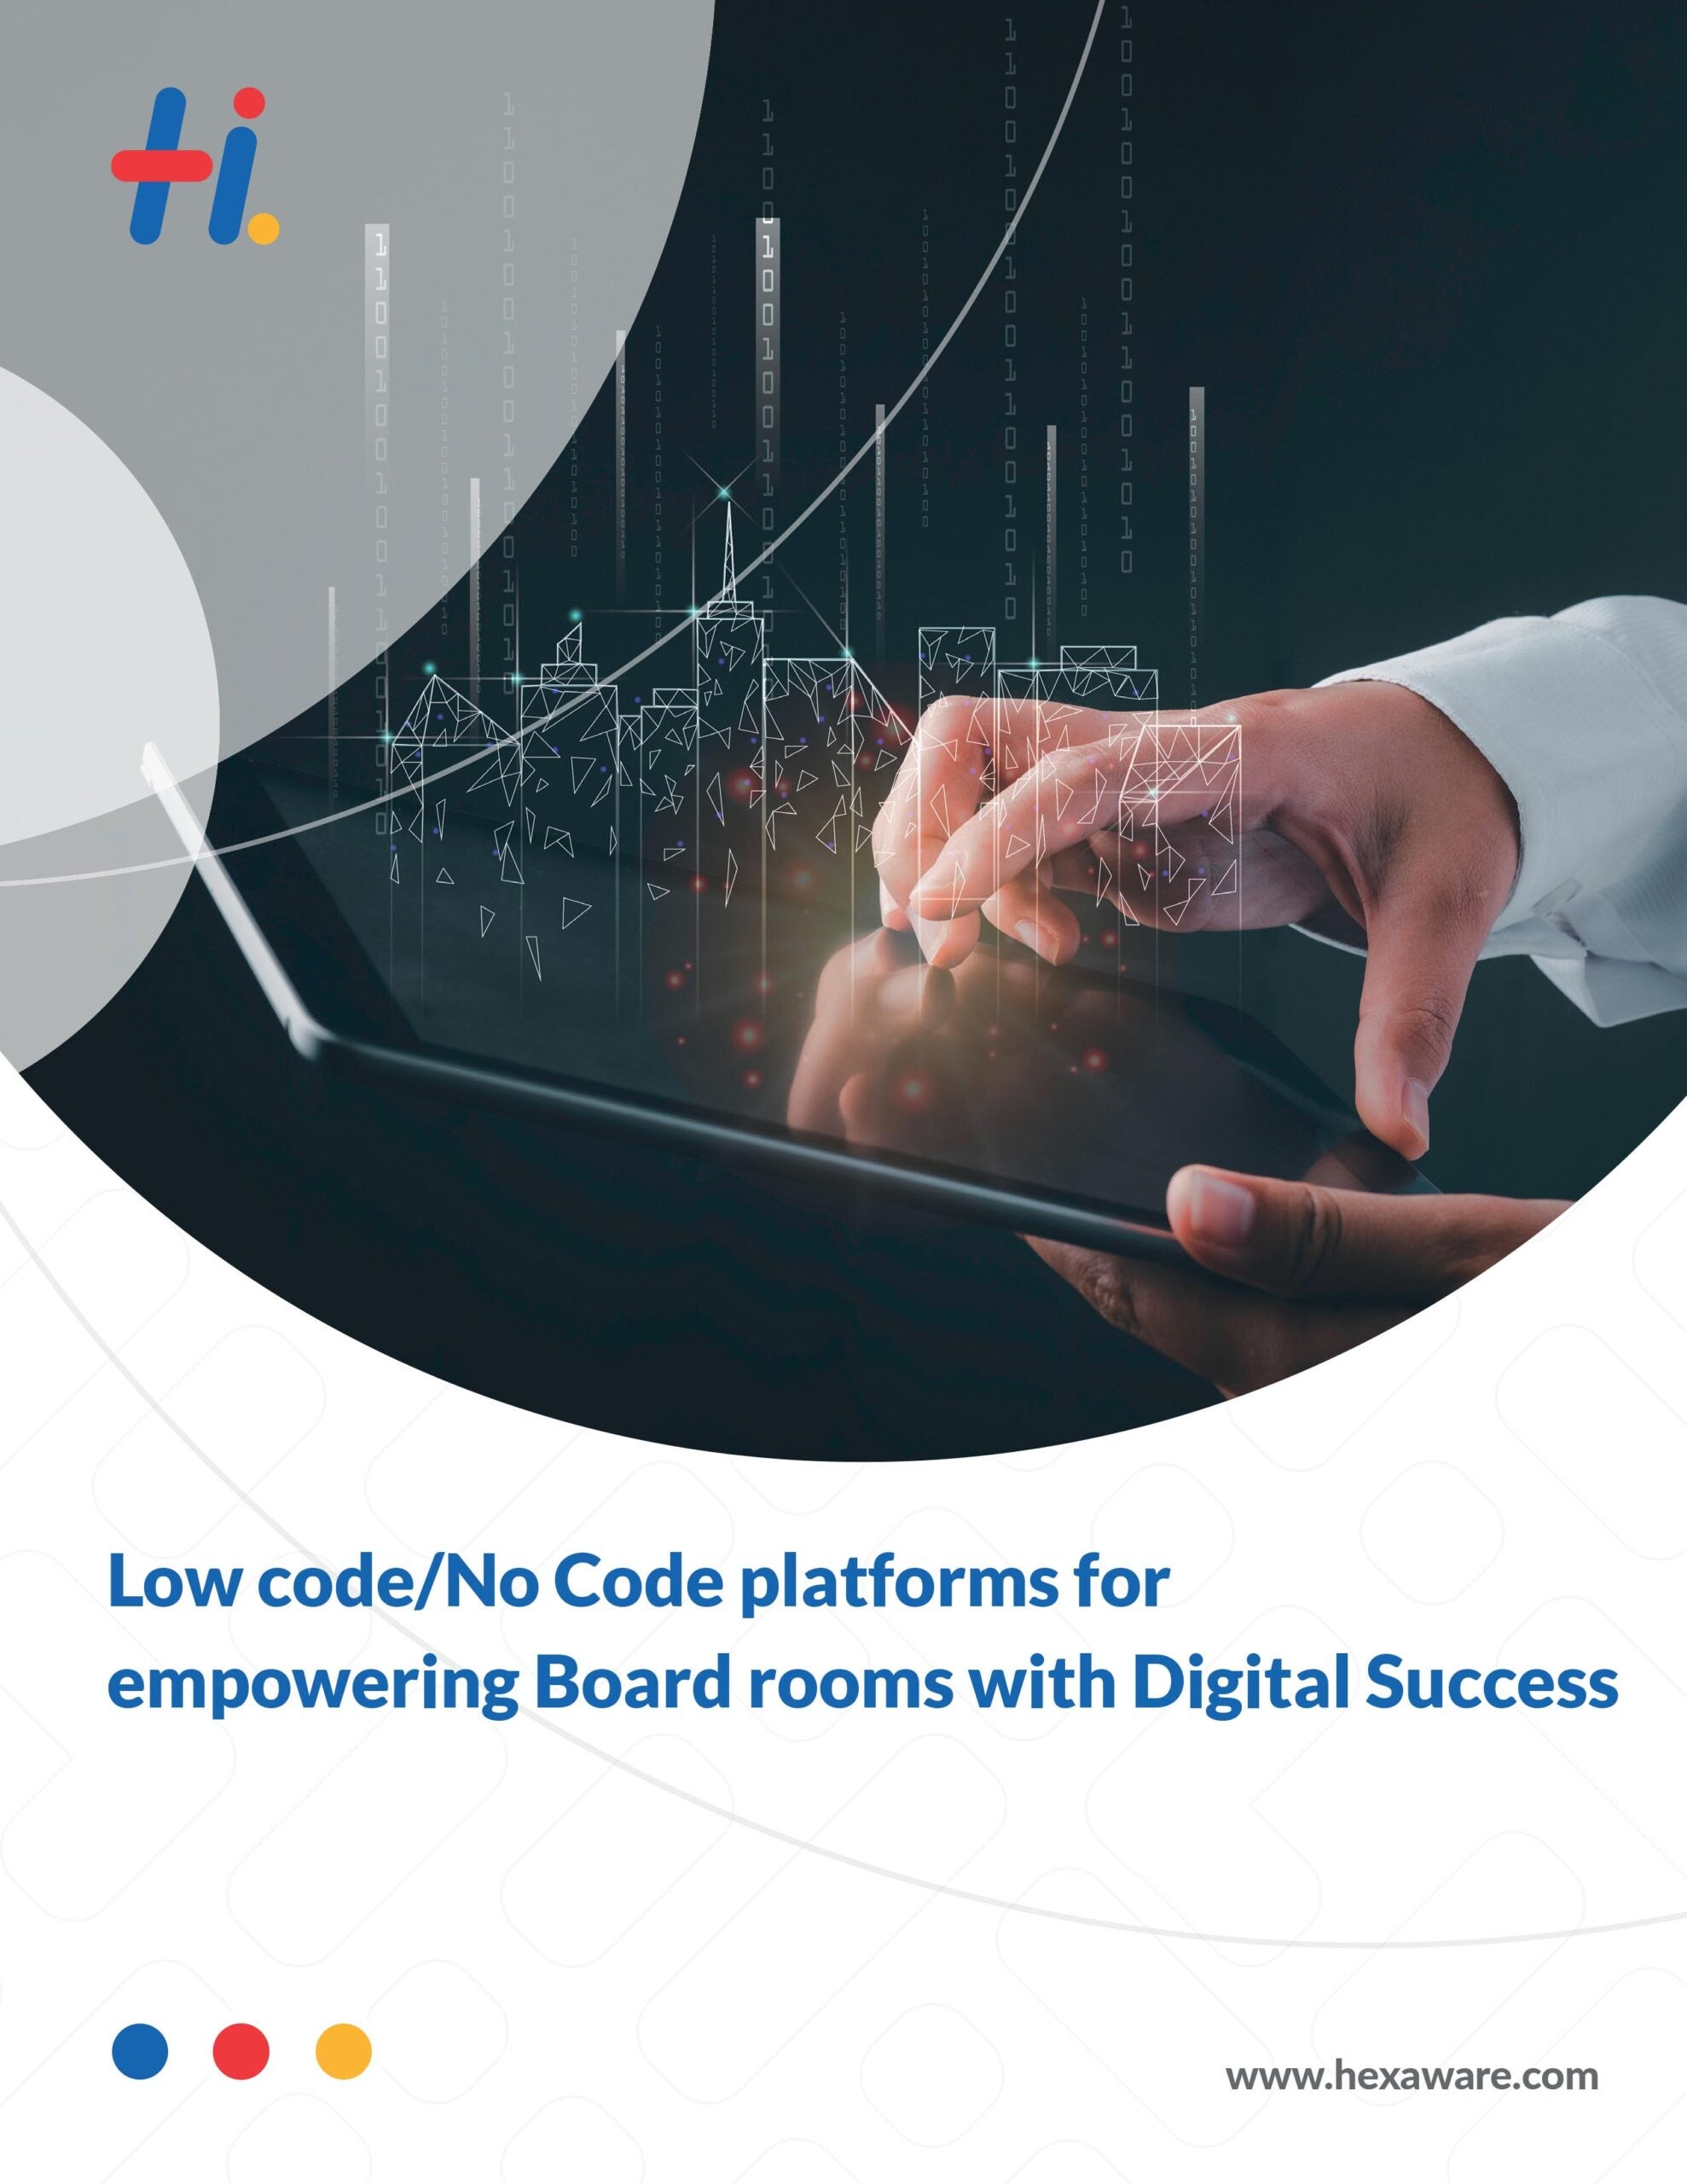 Low code/No Code platforms for empowering Board rooms with Digital Success